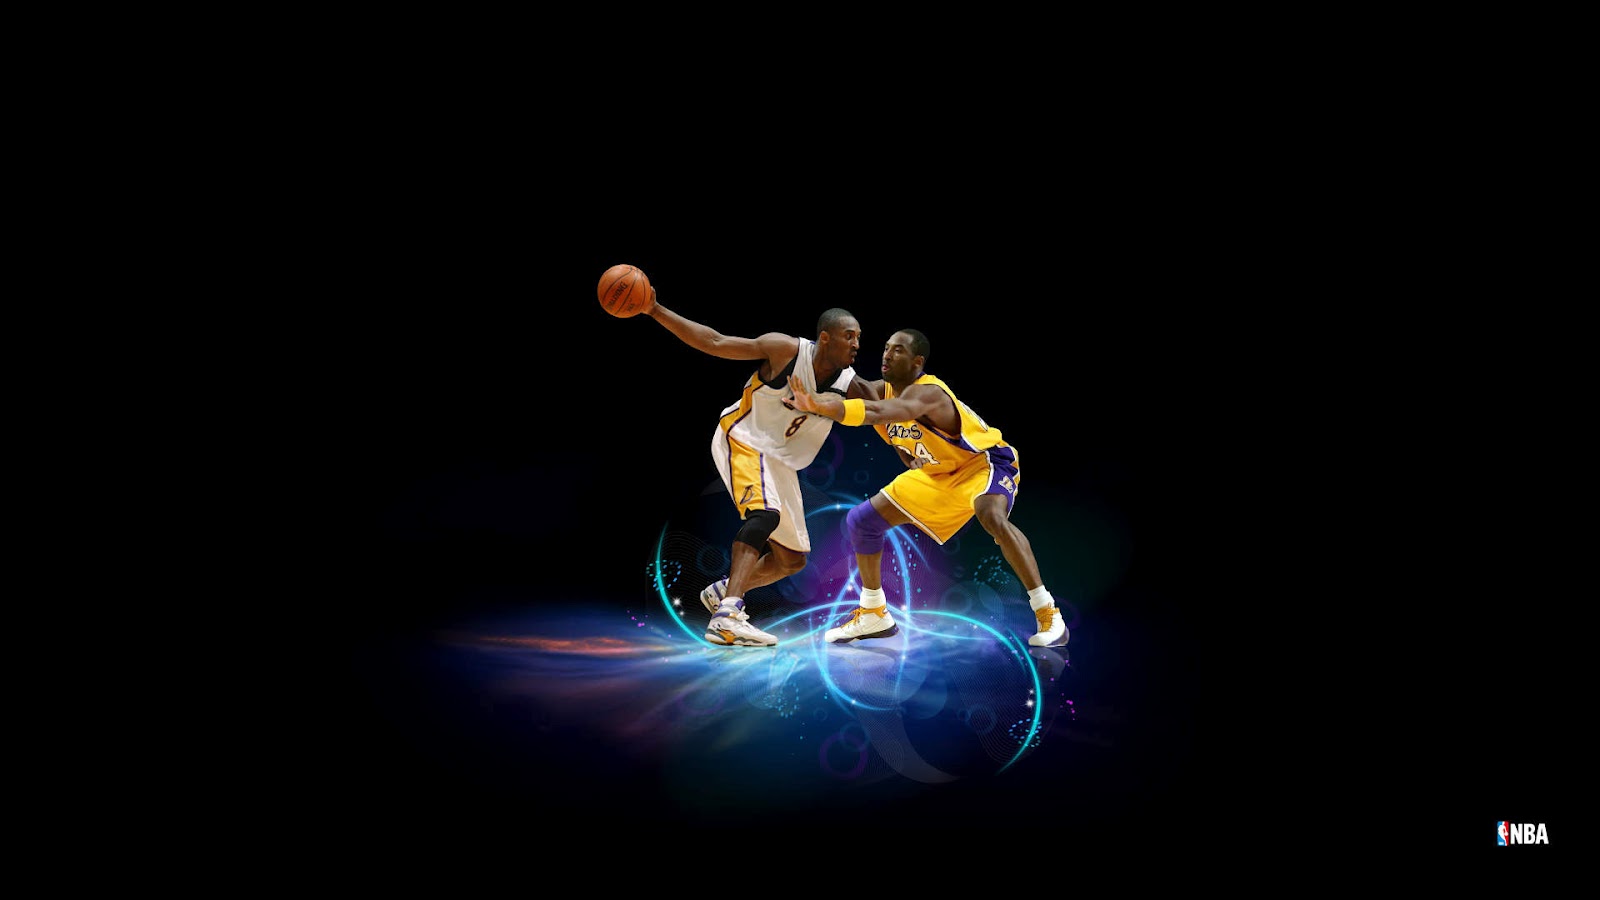 Wallpaper Collection For Your Puter And Mobile Phones Basketball